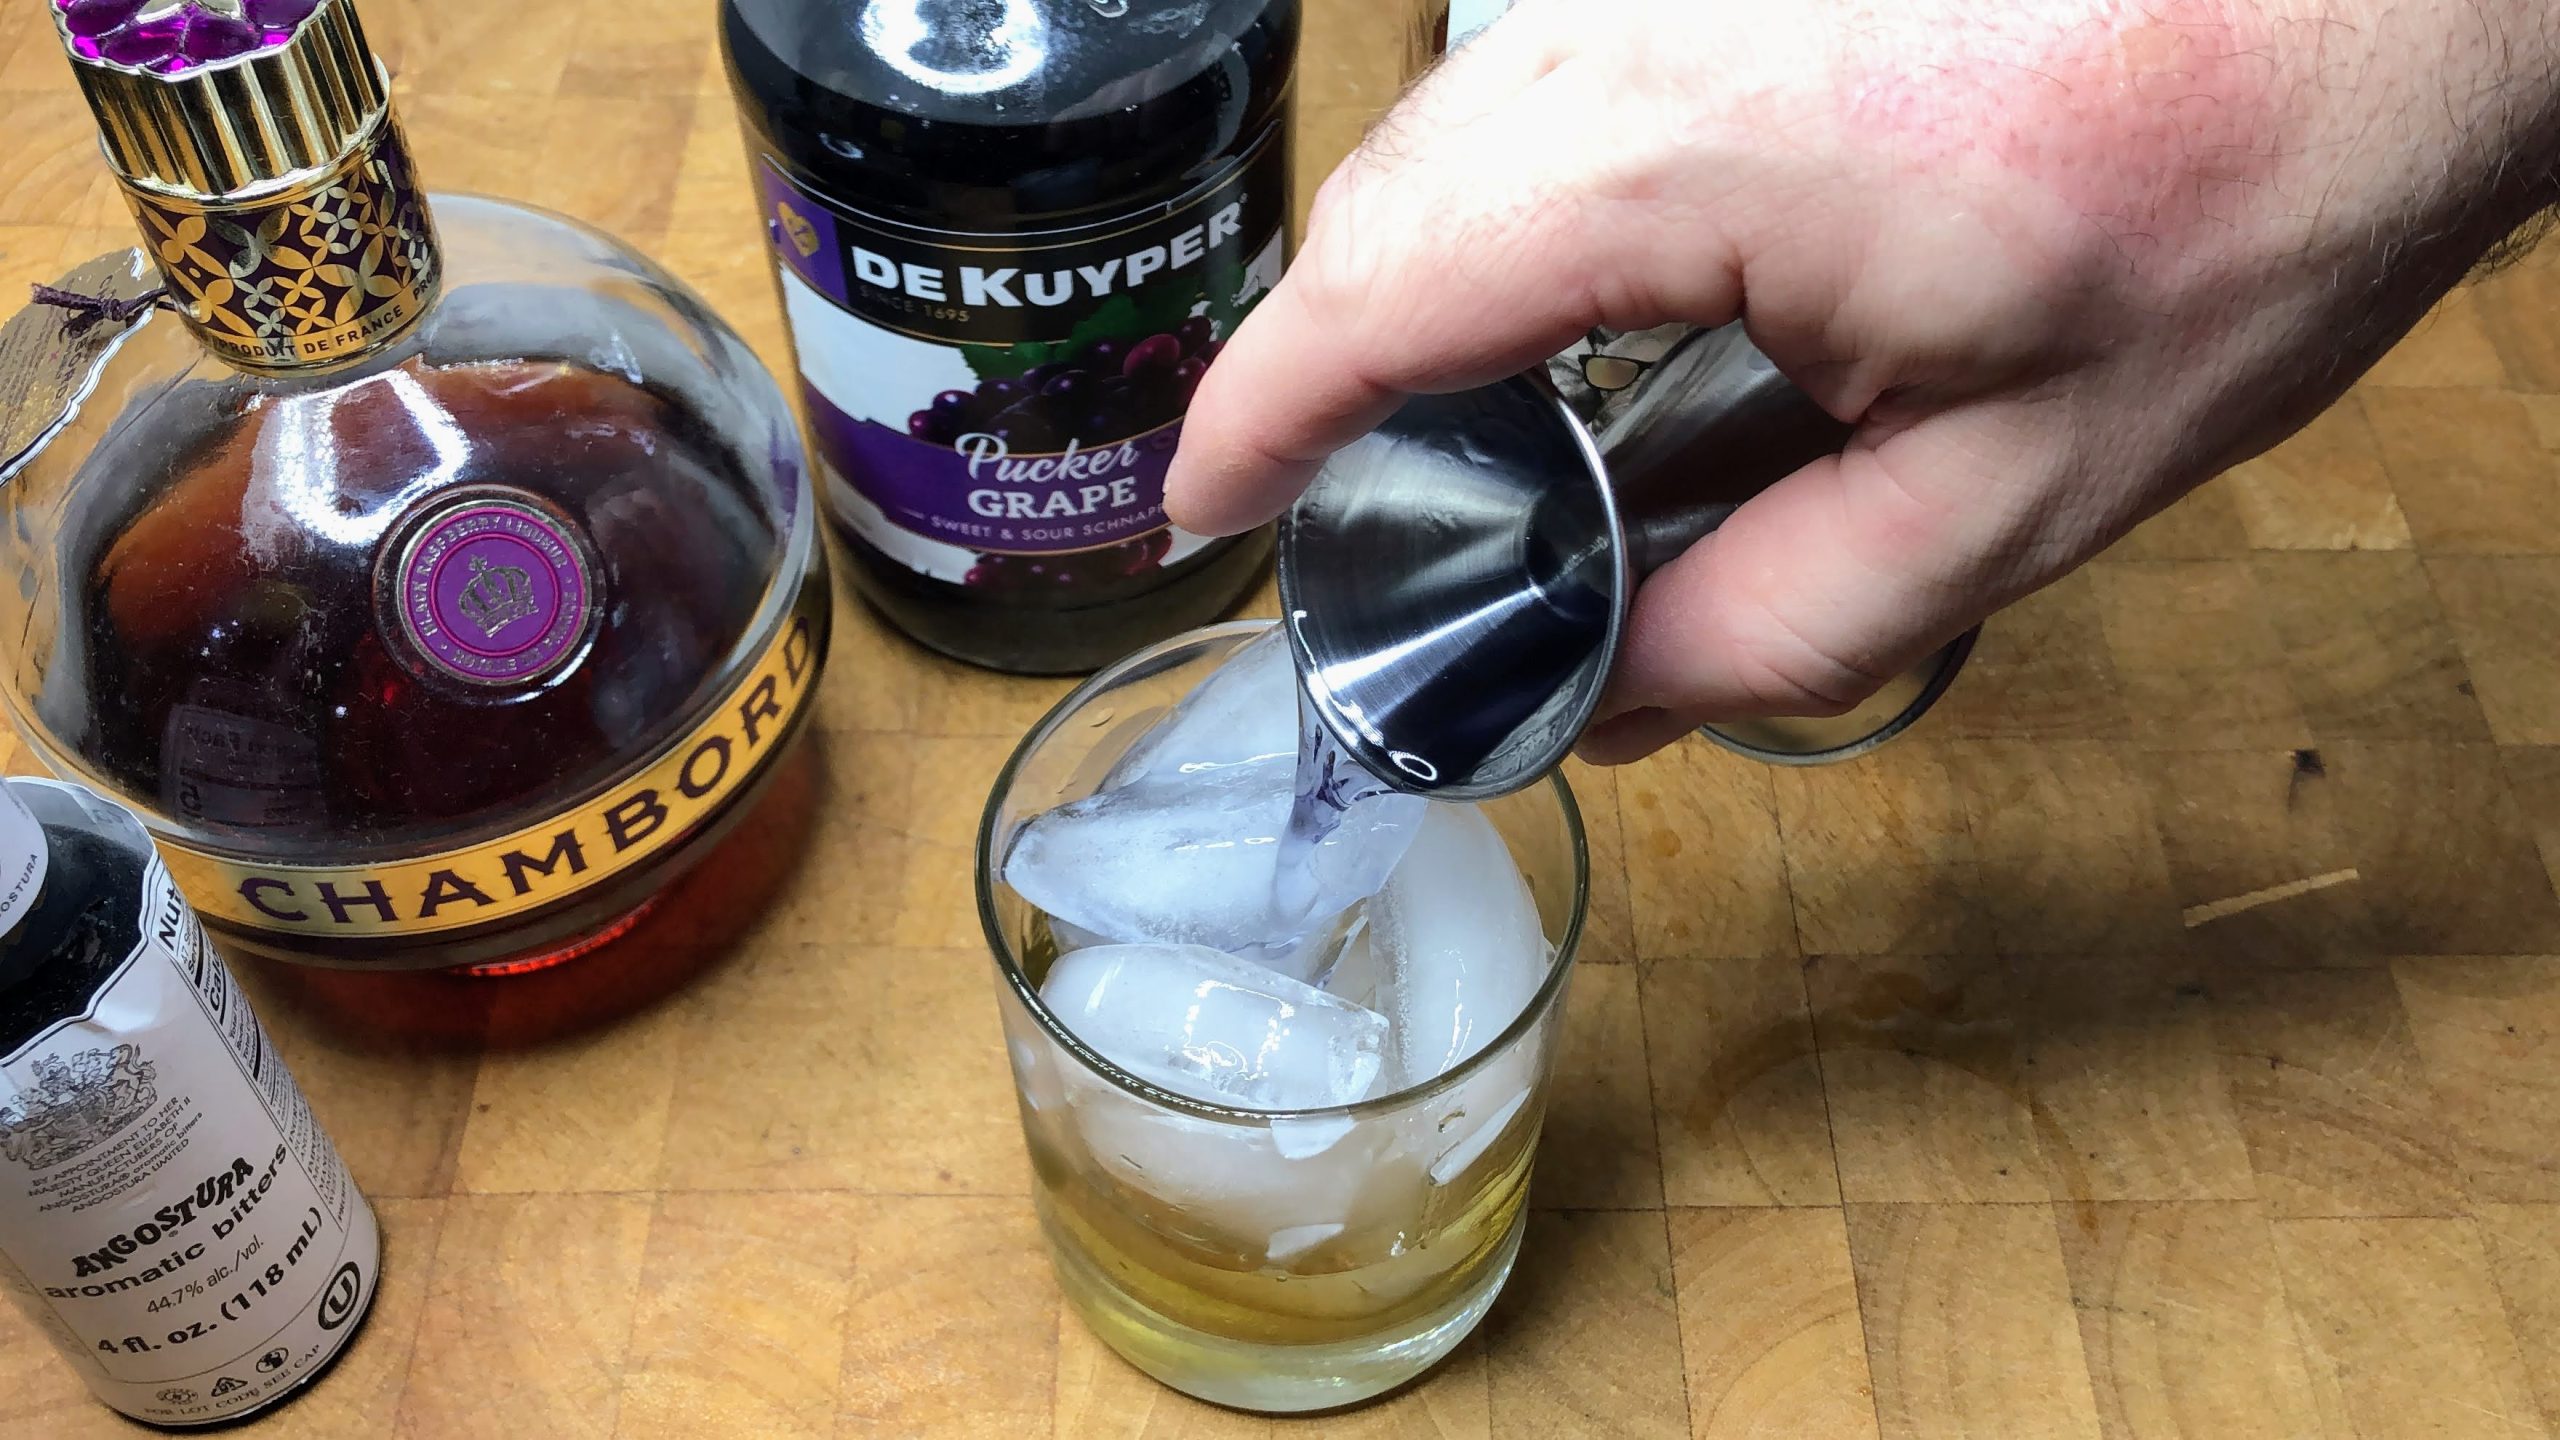 Pouring grape pucker from jigger into glass.